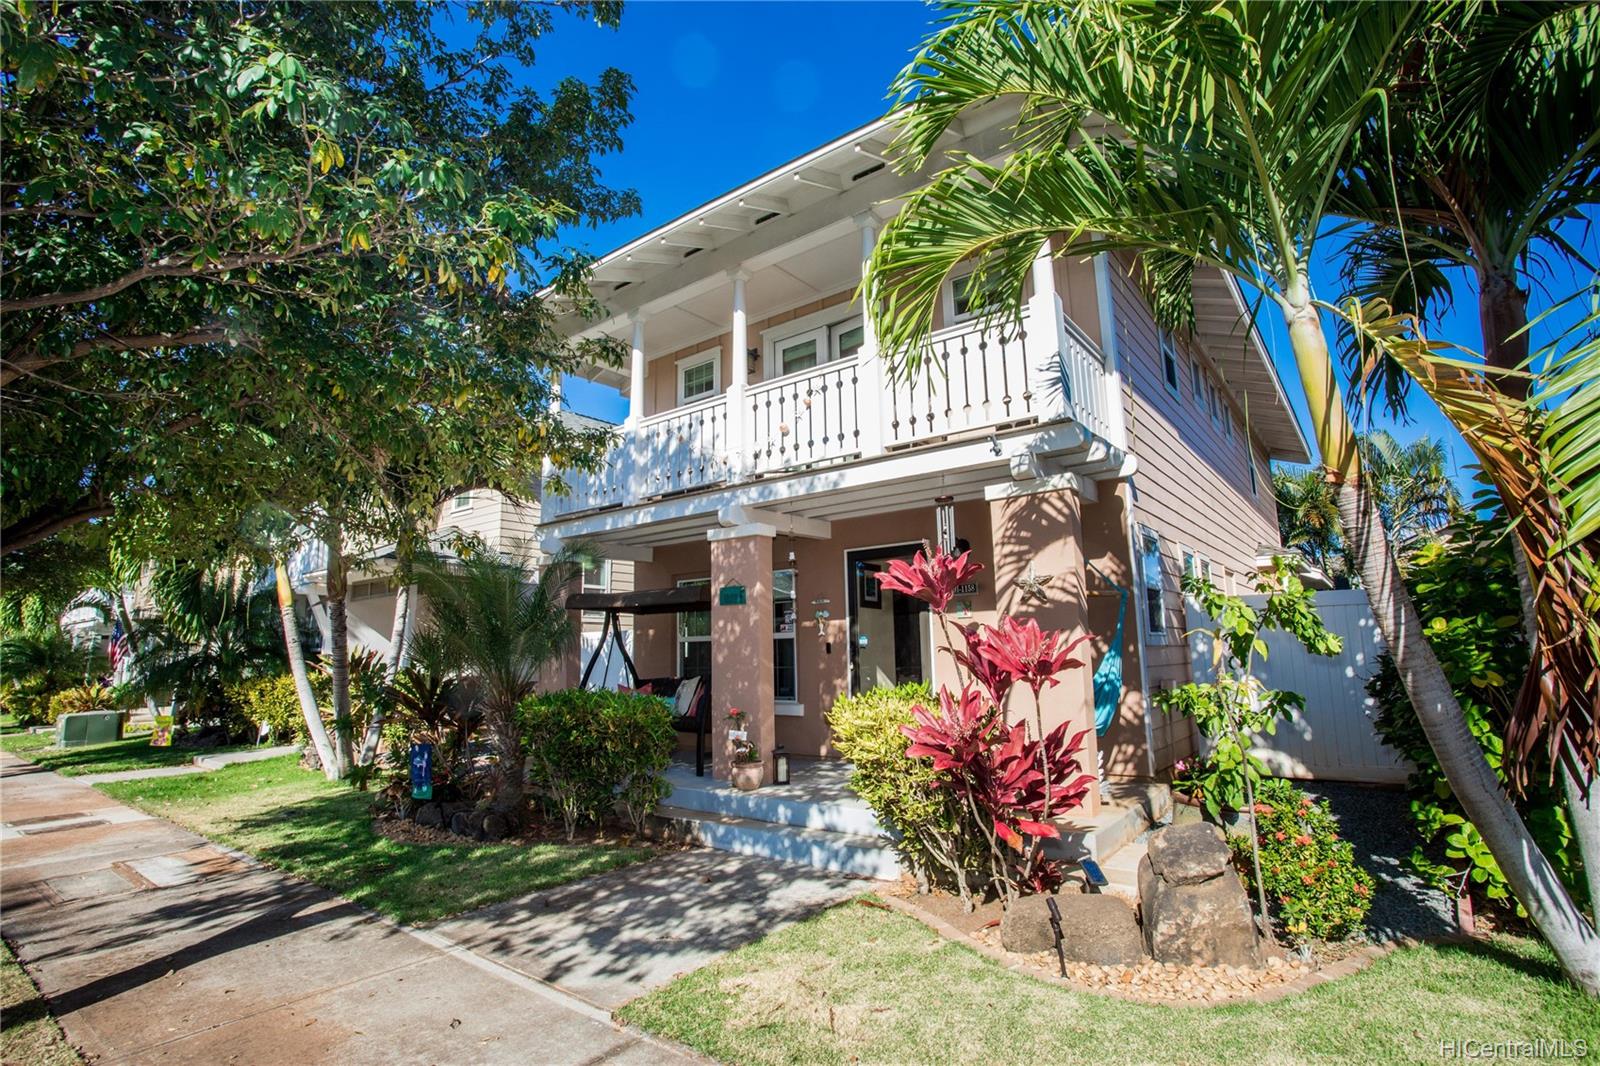 Beautiful Waiemi St.. This is prime living! Patio Lanai Decks on both levels as you keep an eye on which neighbors to invite to poker night.